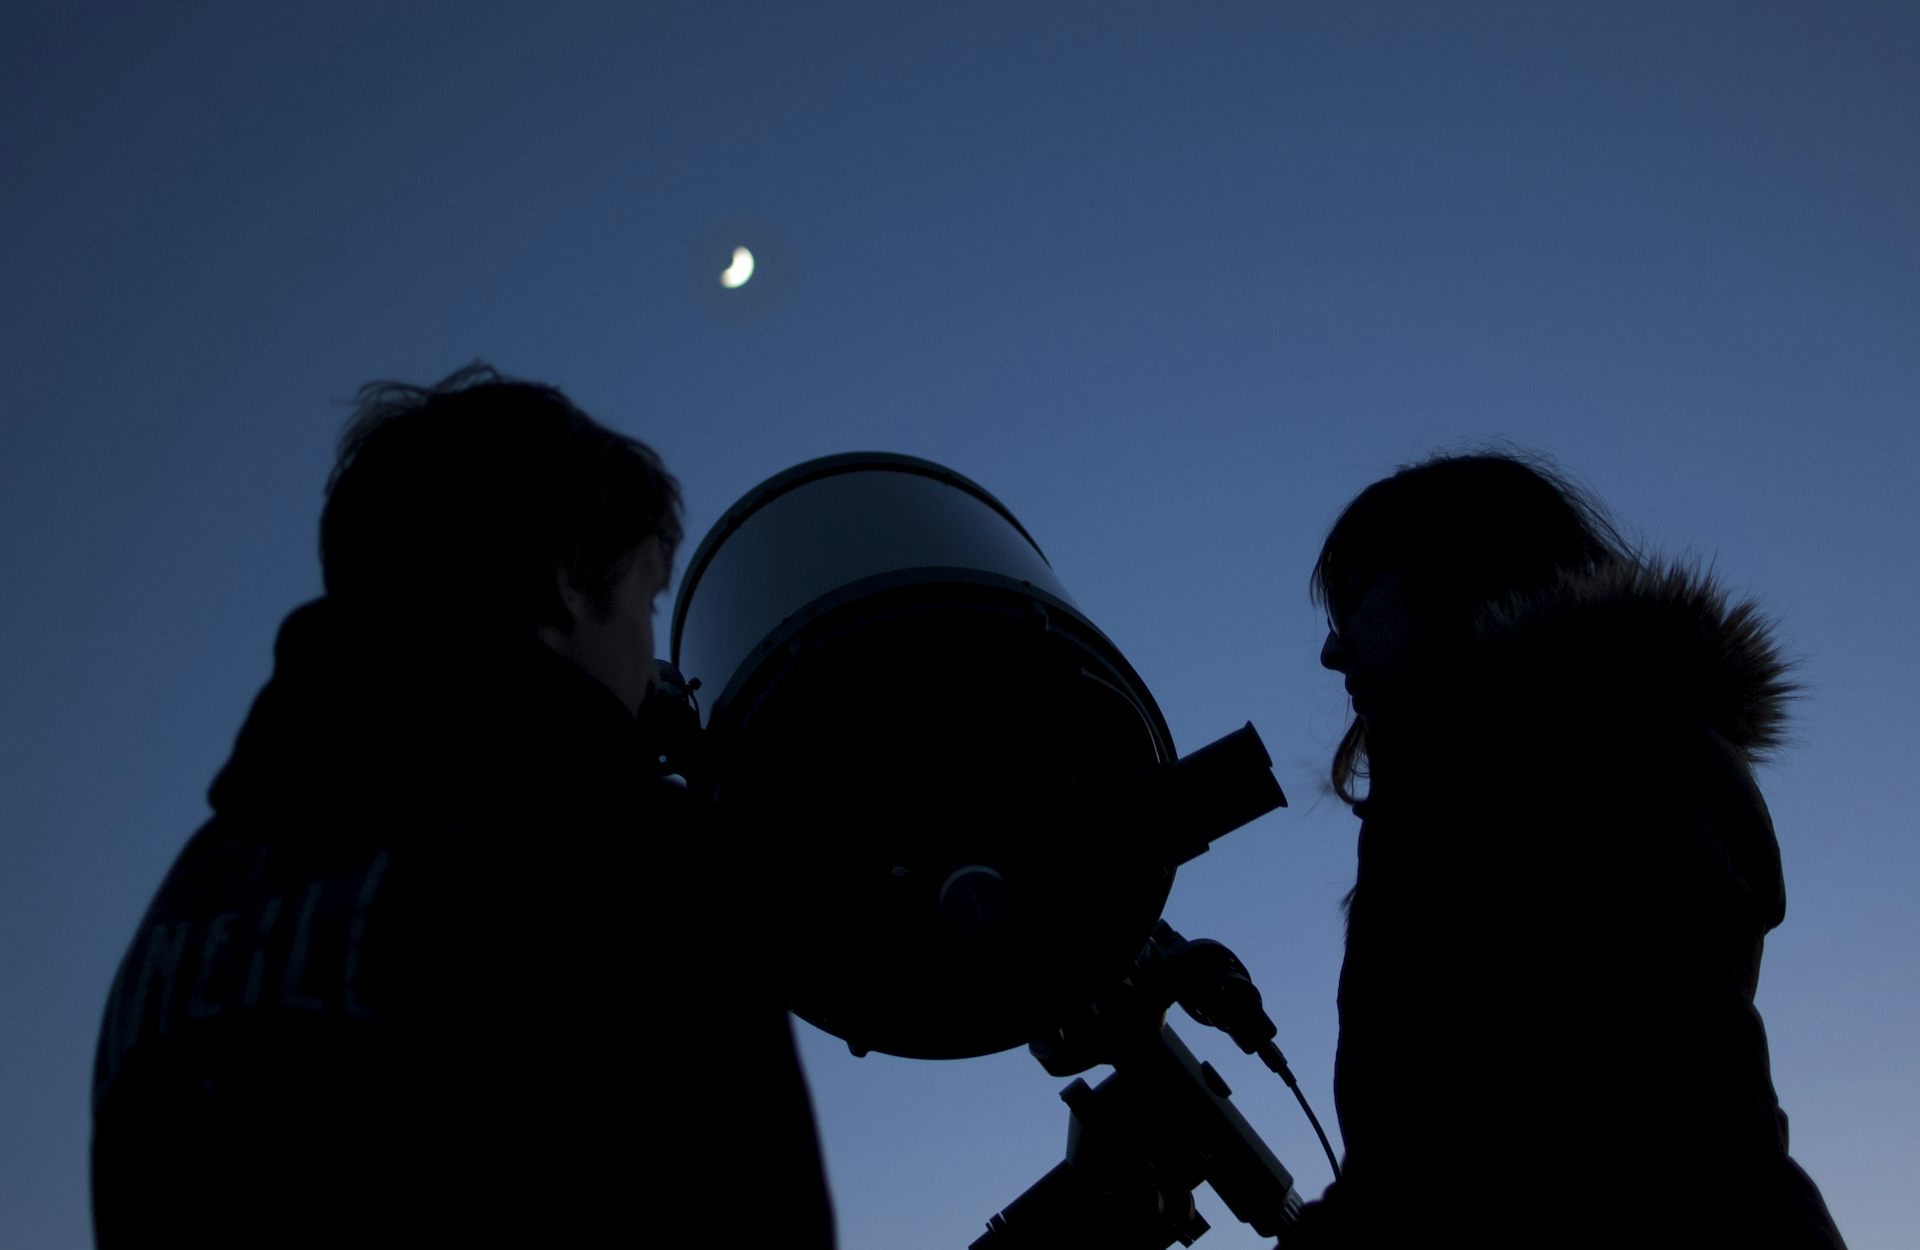 what to look for when buying a telescope